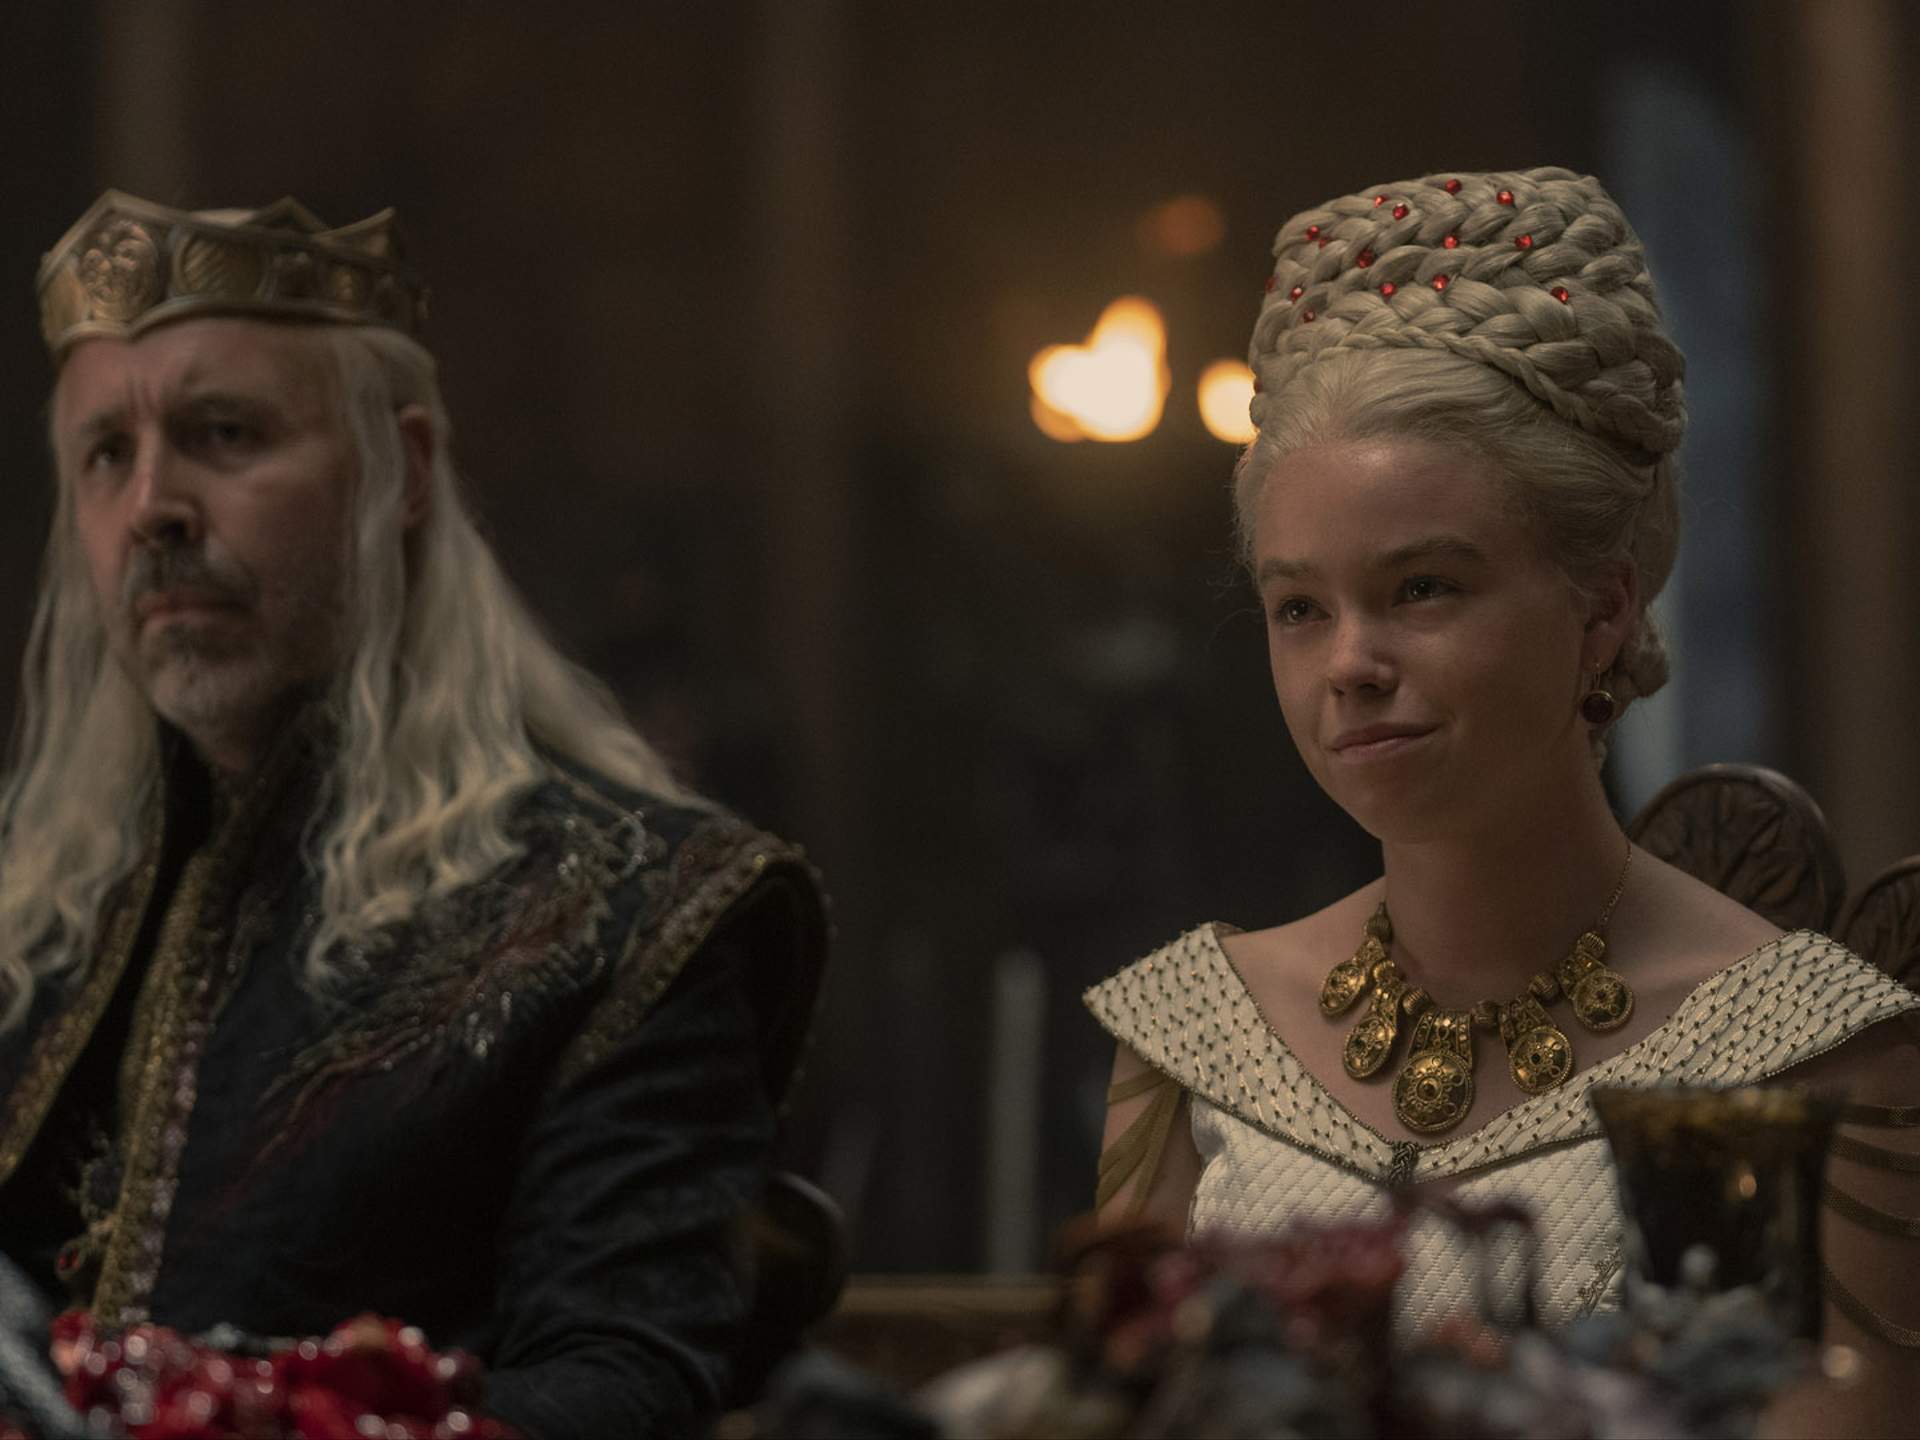 Who is Milly Alcock? Meet the actor who plays young Rhaenyra Targaryen in  House of the Dragon